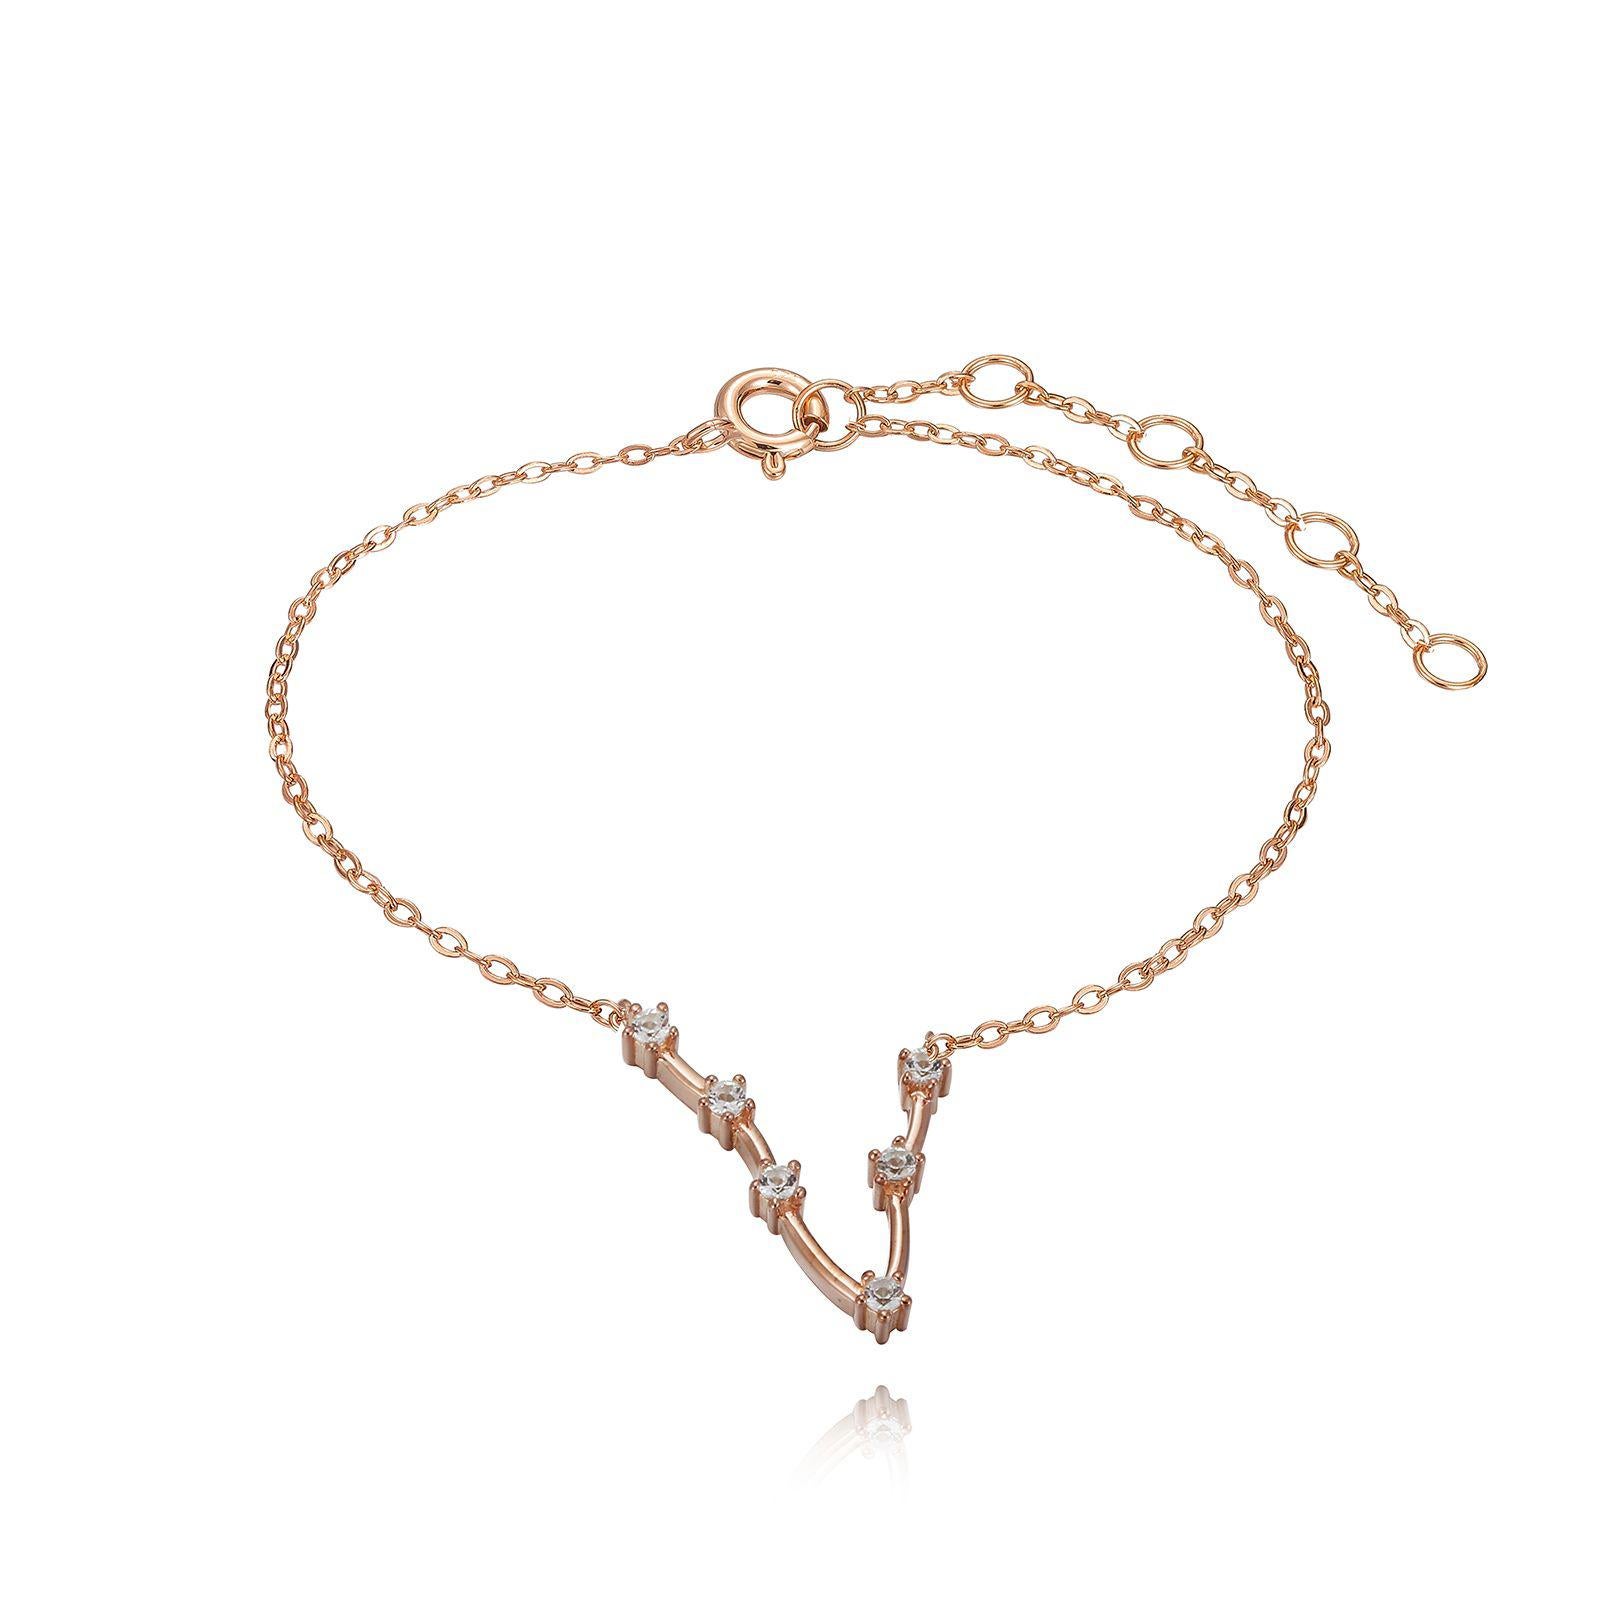 You are unique and your zodiac tells part of your story.  How your zodiac is displayed in the beautiful nighttime sky is what we want you to carry with you always. This pisces constellation bracelet shares a part of your personality with us all 